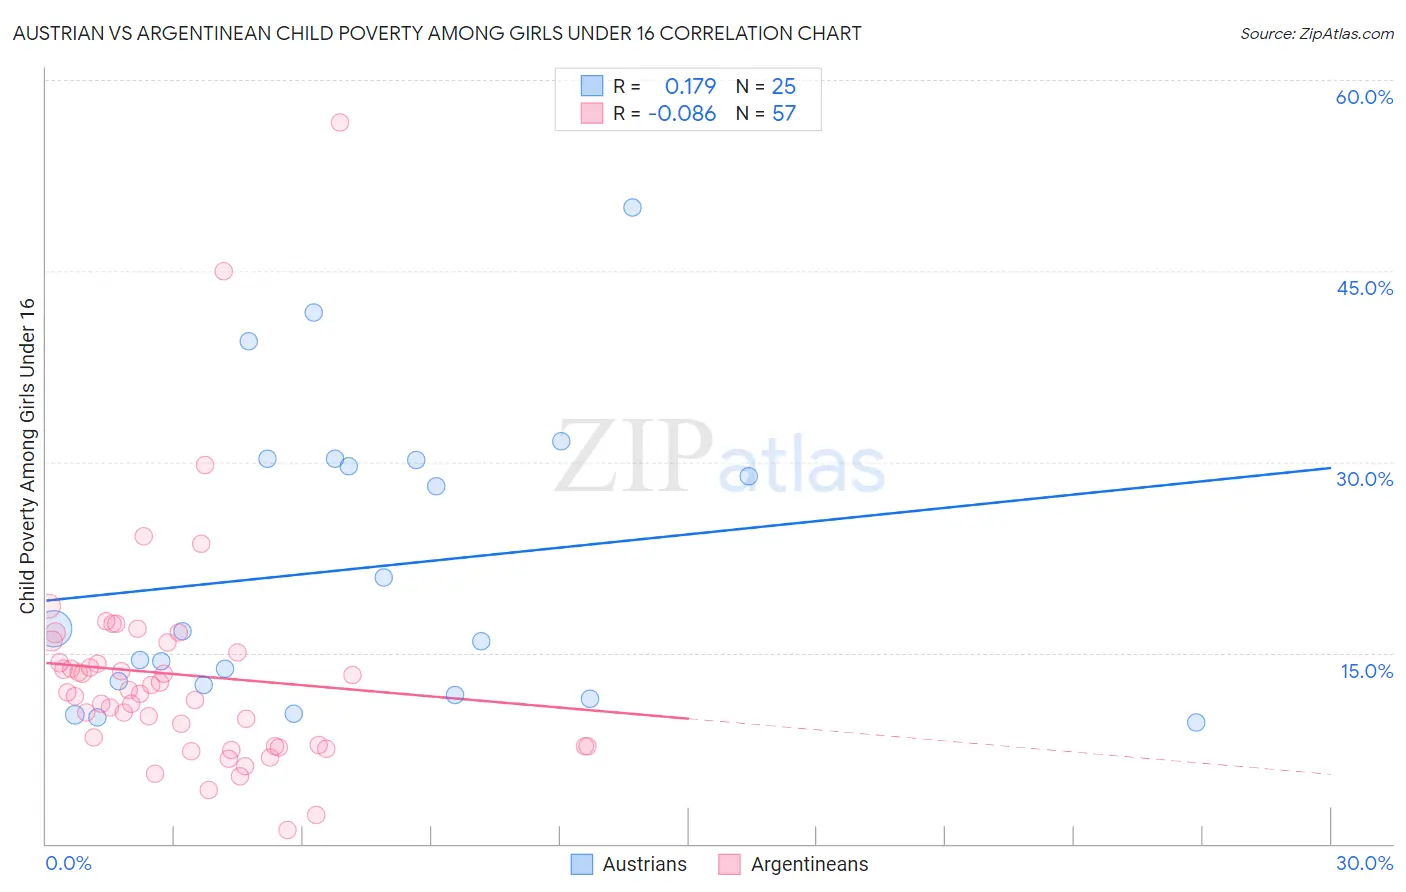 Austrian vs Argentinean Child Poverty Among Girls Under 16